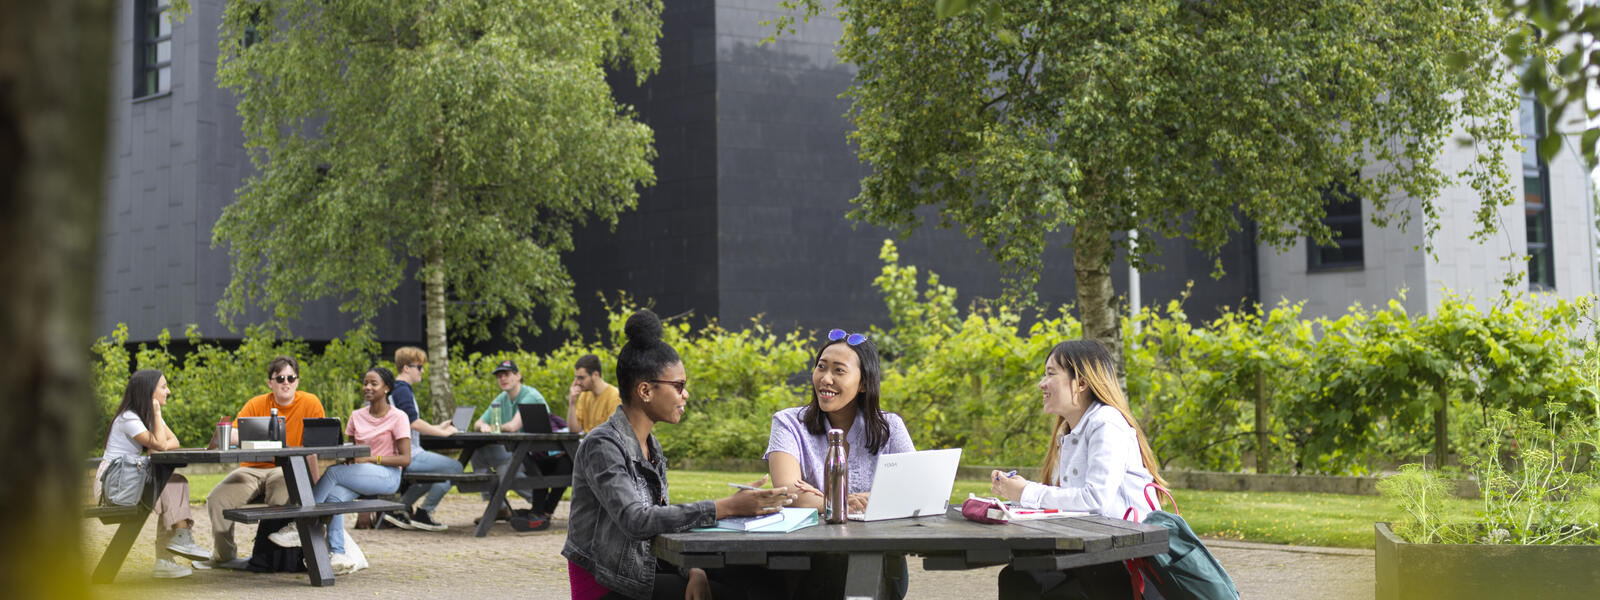 Students sat outside at a table with a modern building in the background.